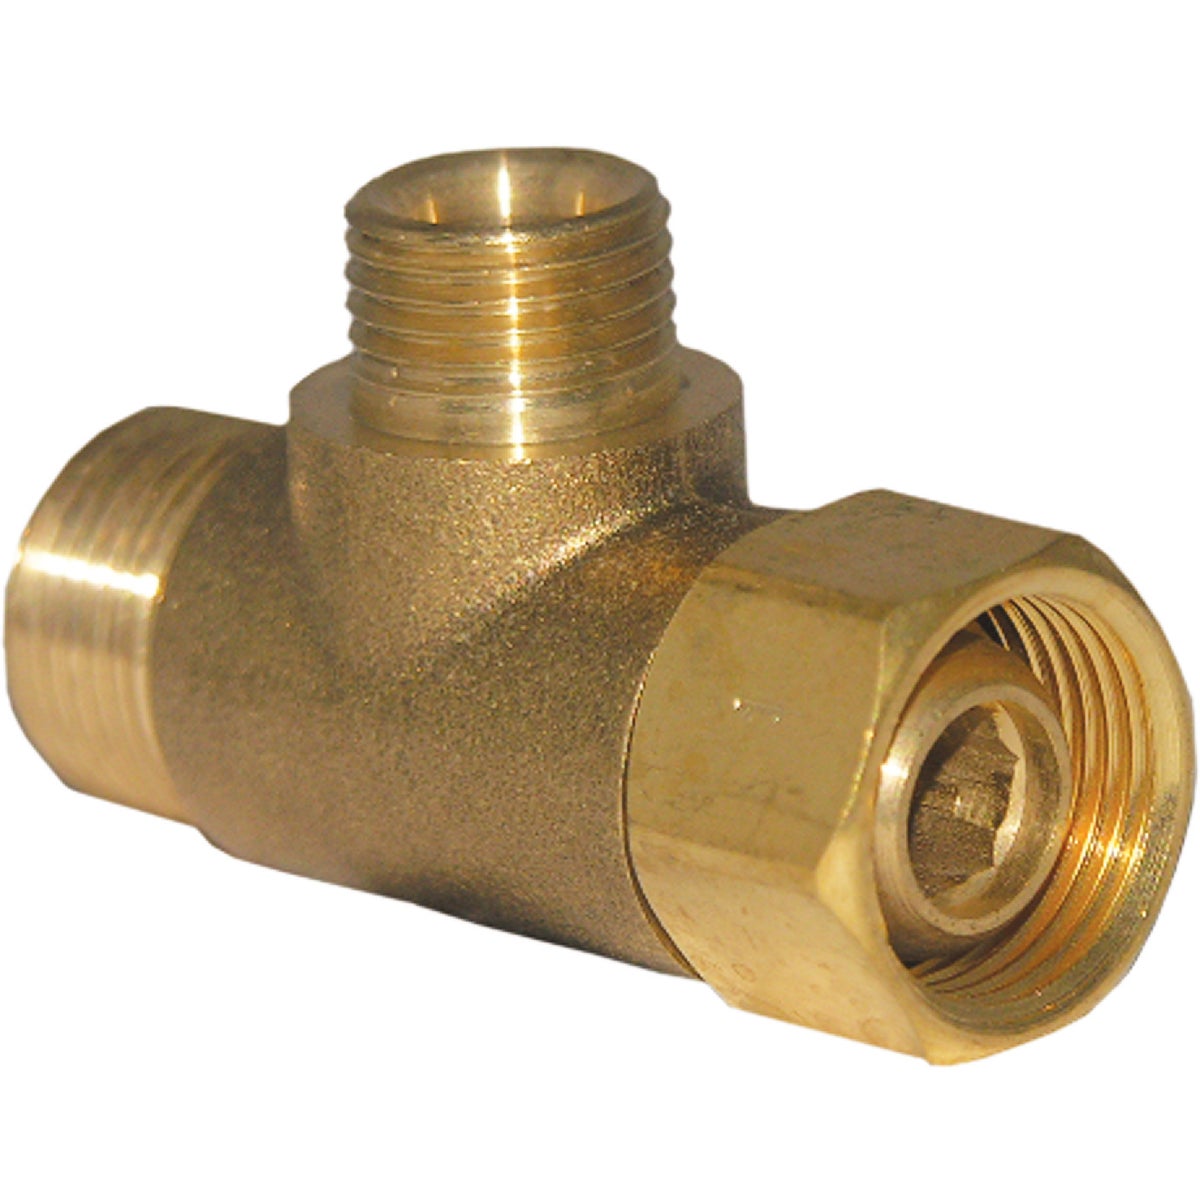 Lasco 3/8 In. FC Inlet x 3/8 In.C Outlet x 1/4 In.C Outlet Brass Extender Tee